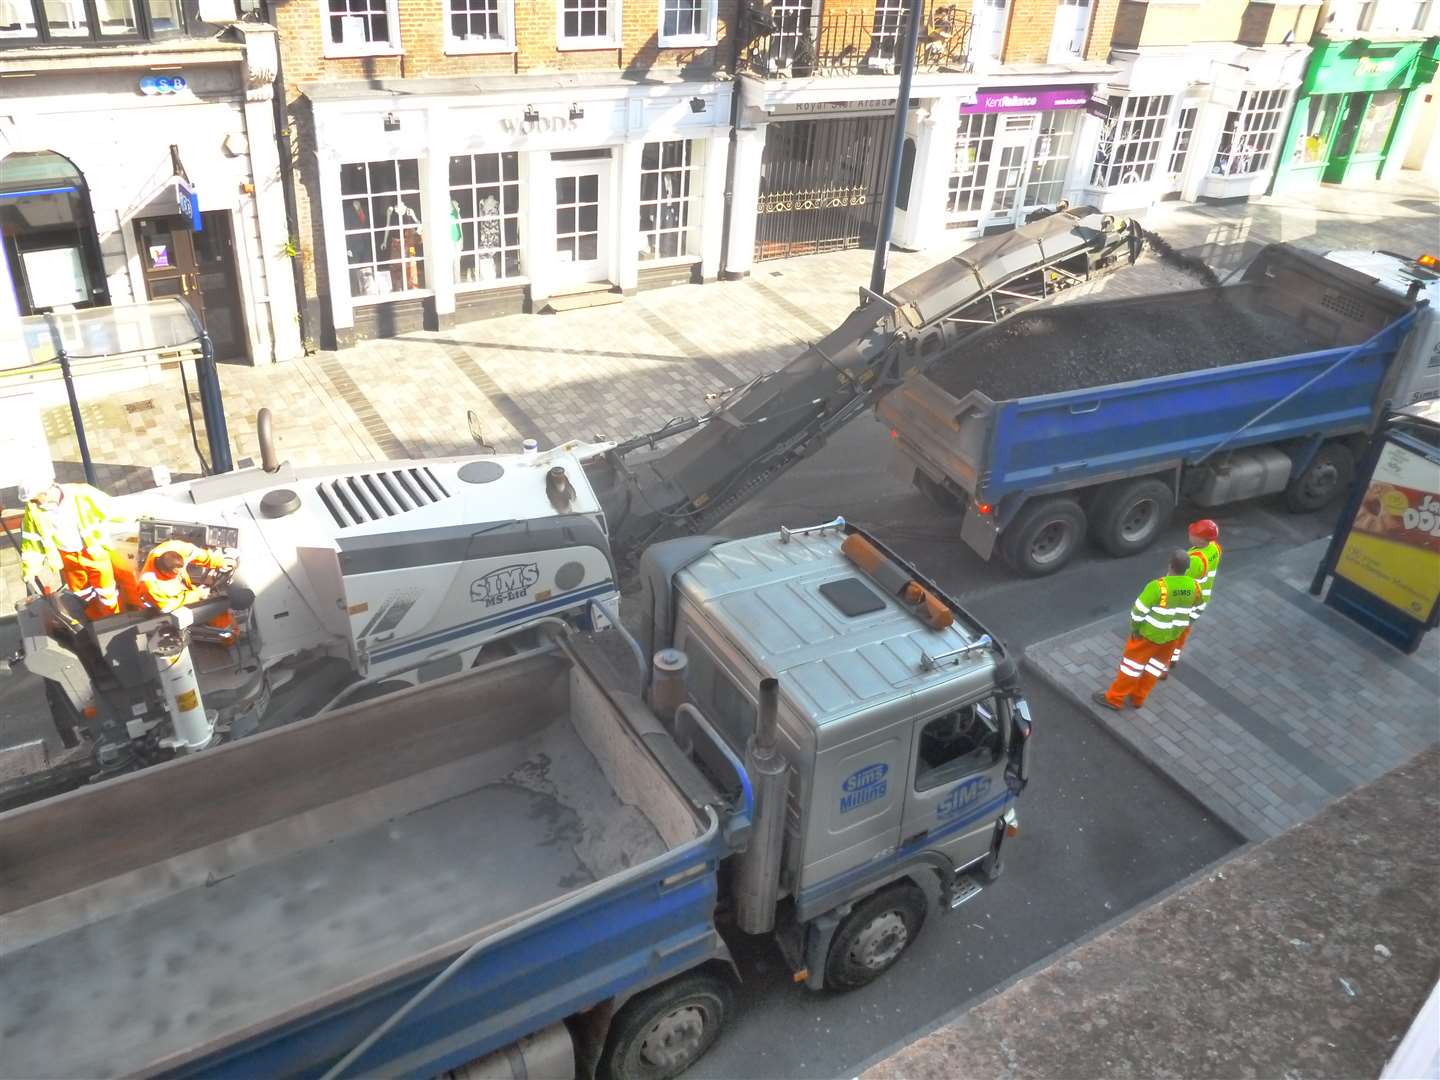 Road crews move in to dig up the High Street